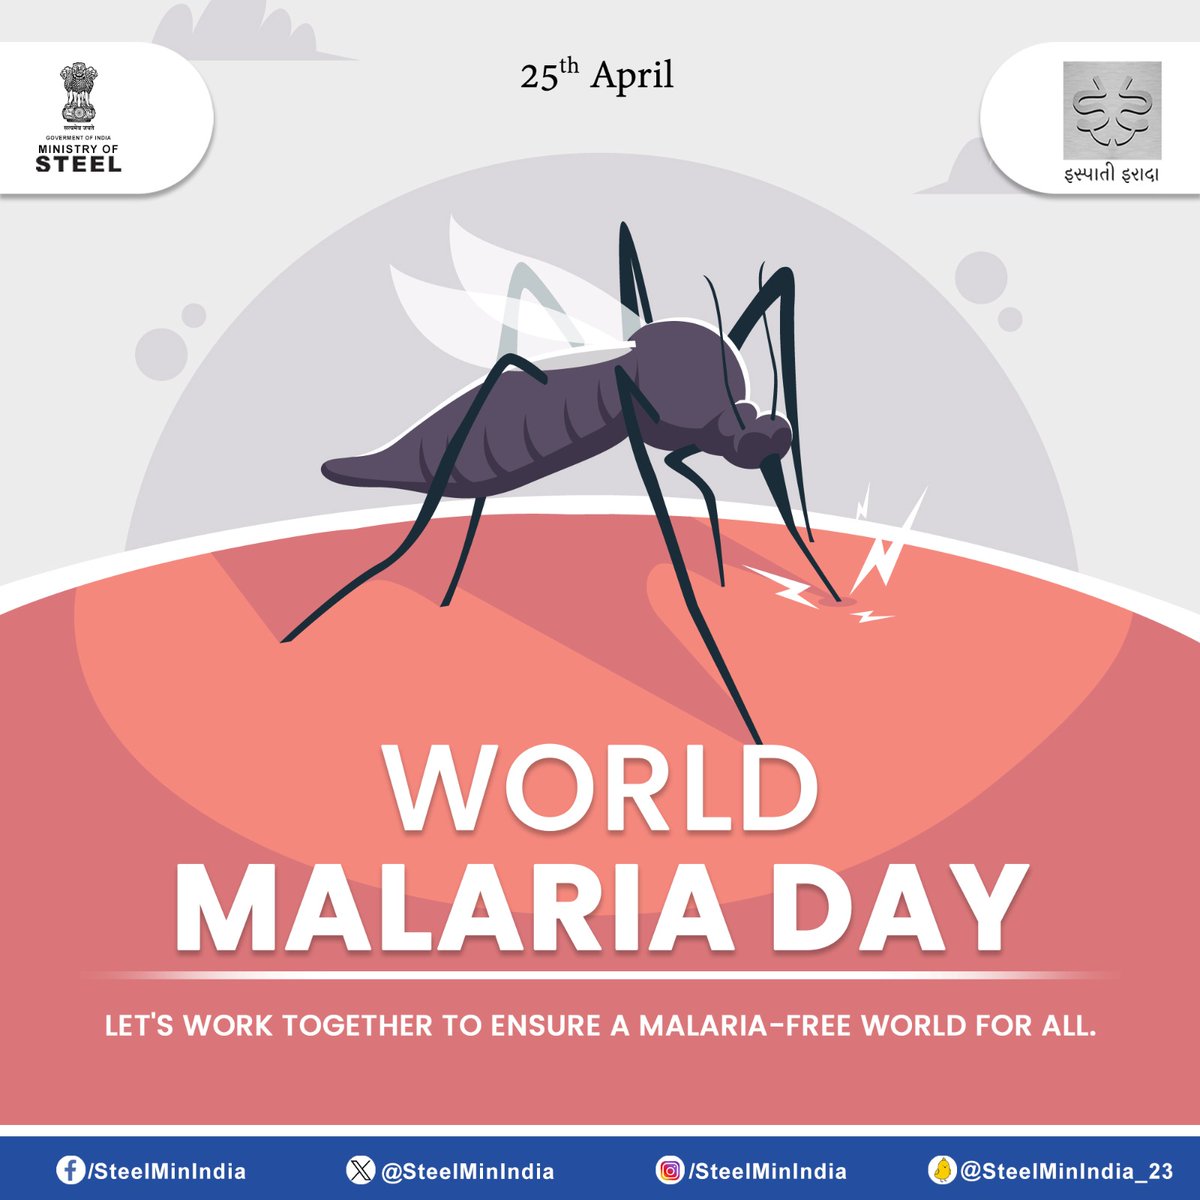 On #WorldMalariaDay, let's join hands to fight against this deadly disease and work towards a healthier, malaria-free world. Together, we can make a difference!